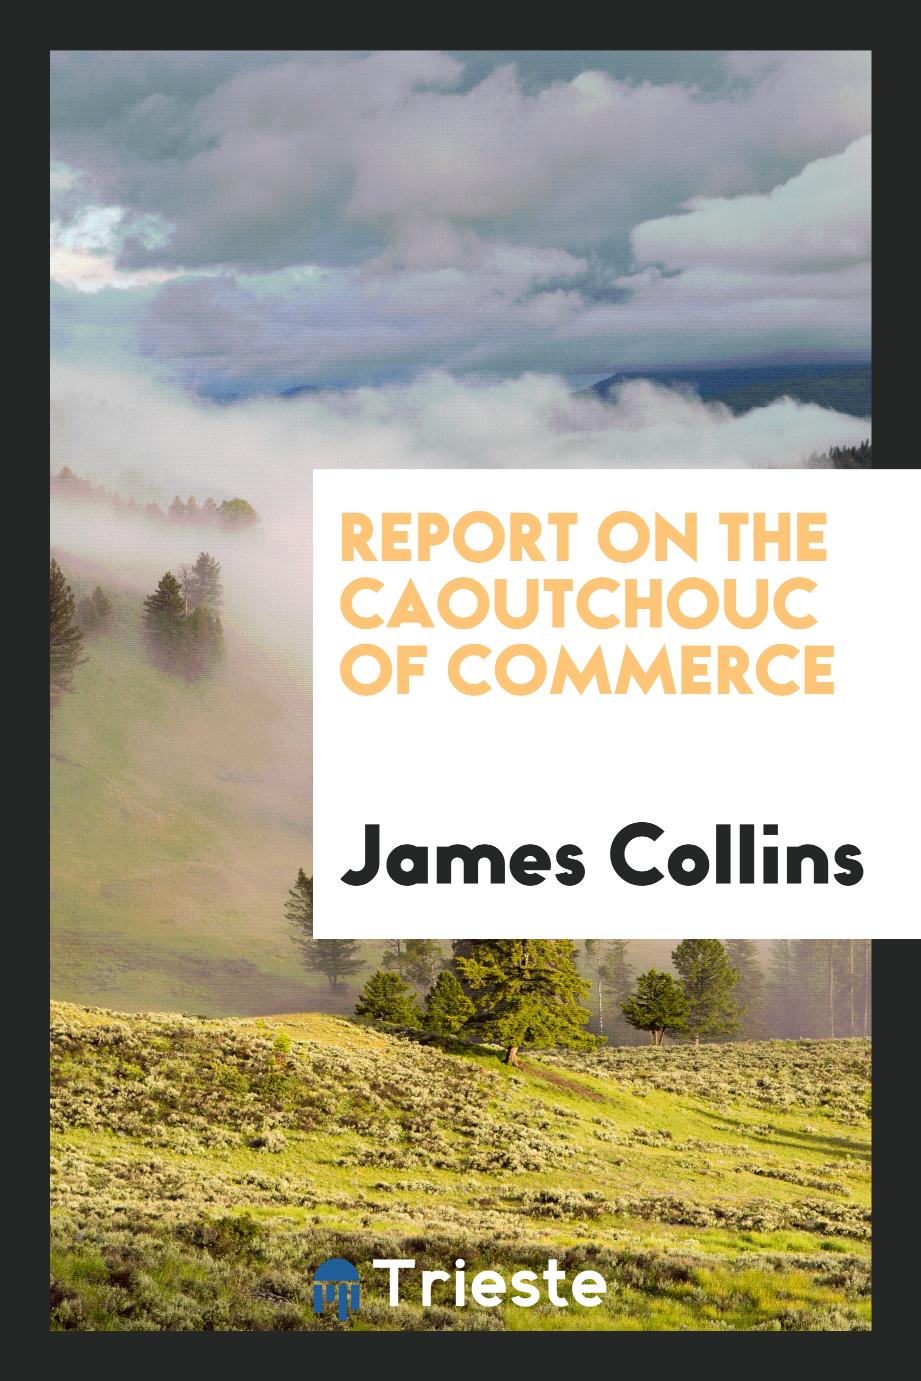 Report on the caoutchouc of commerce